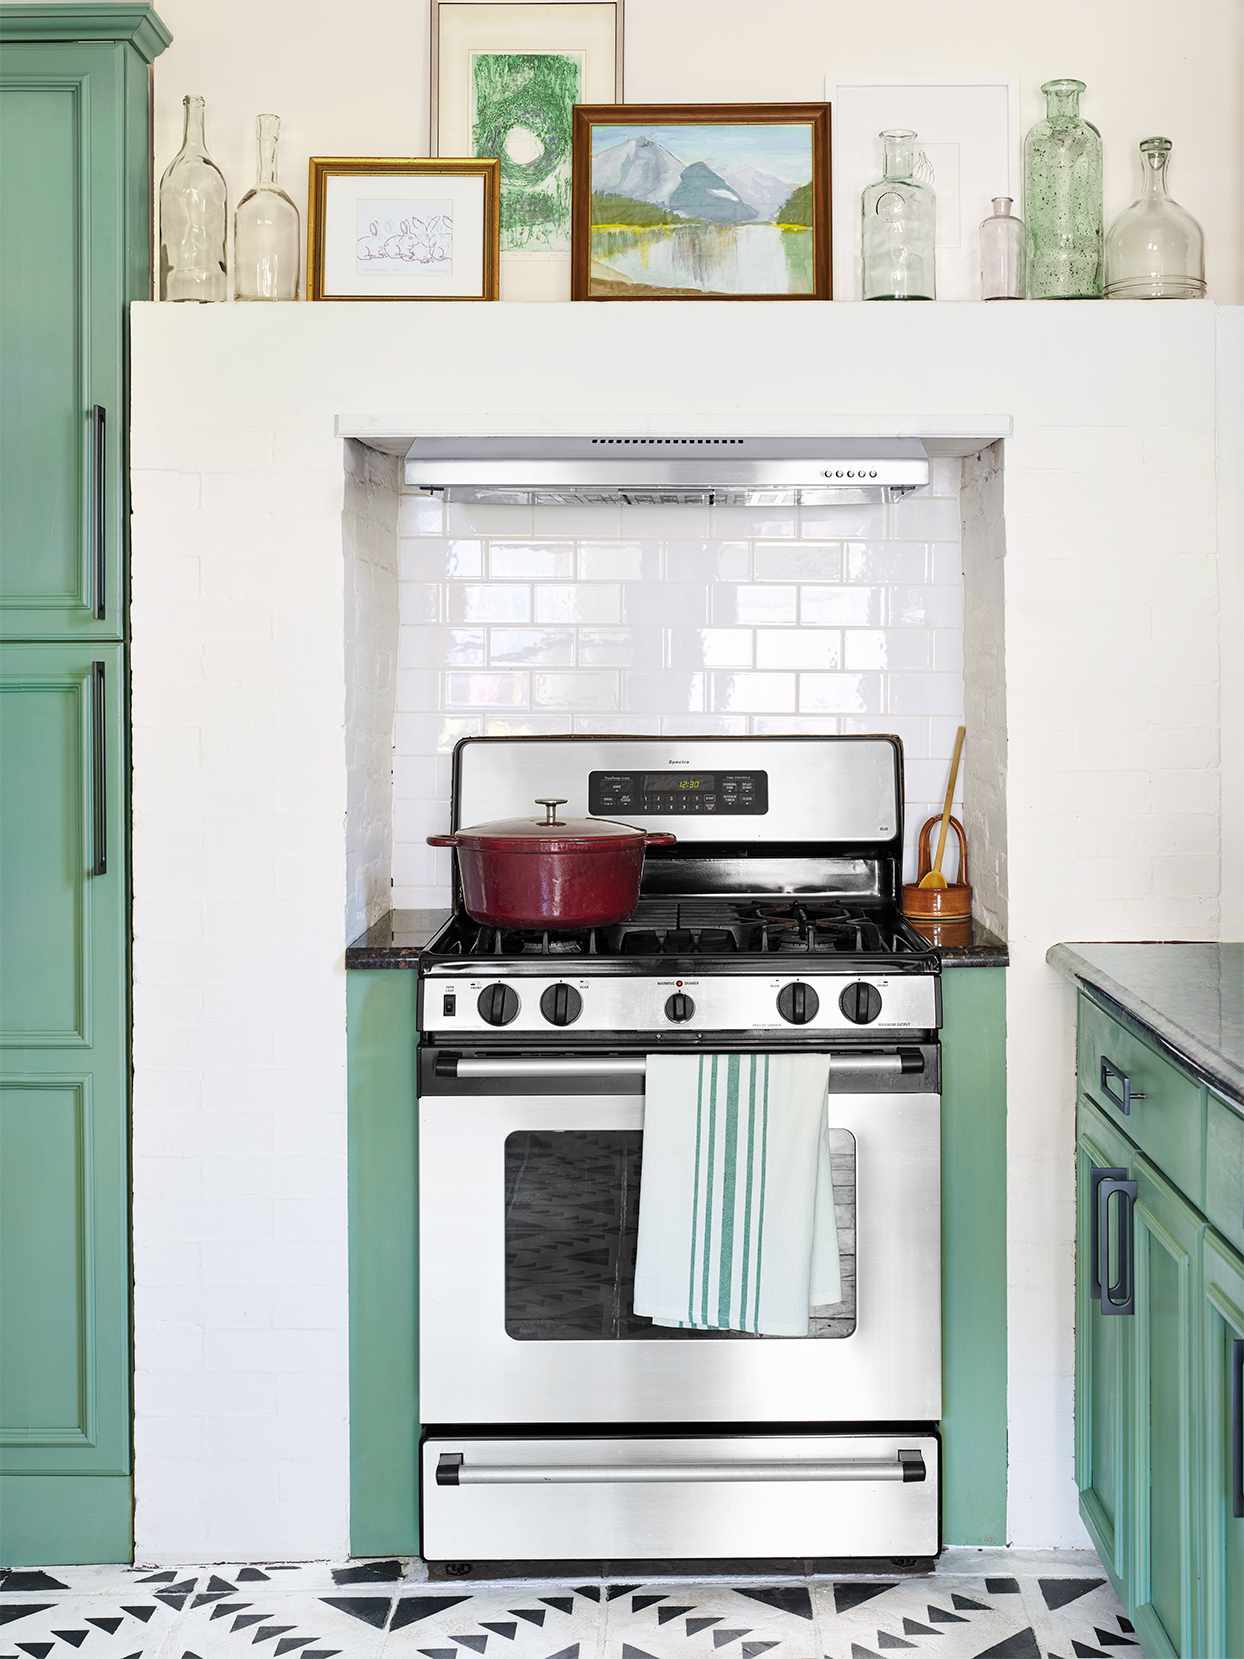 Stove surrounded by white and green wall